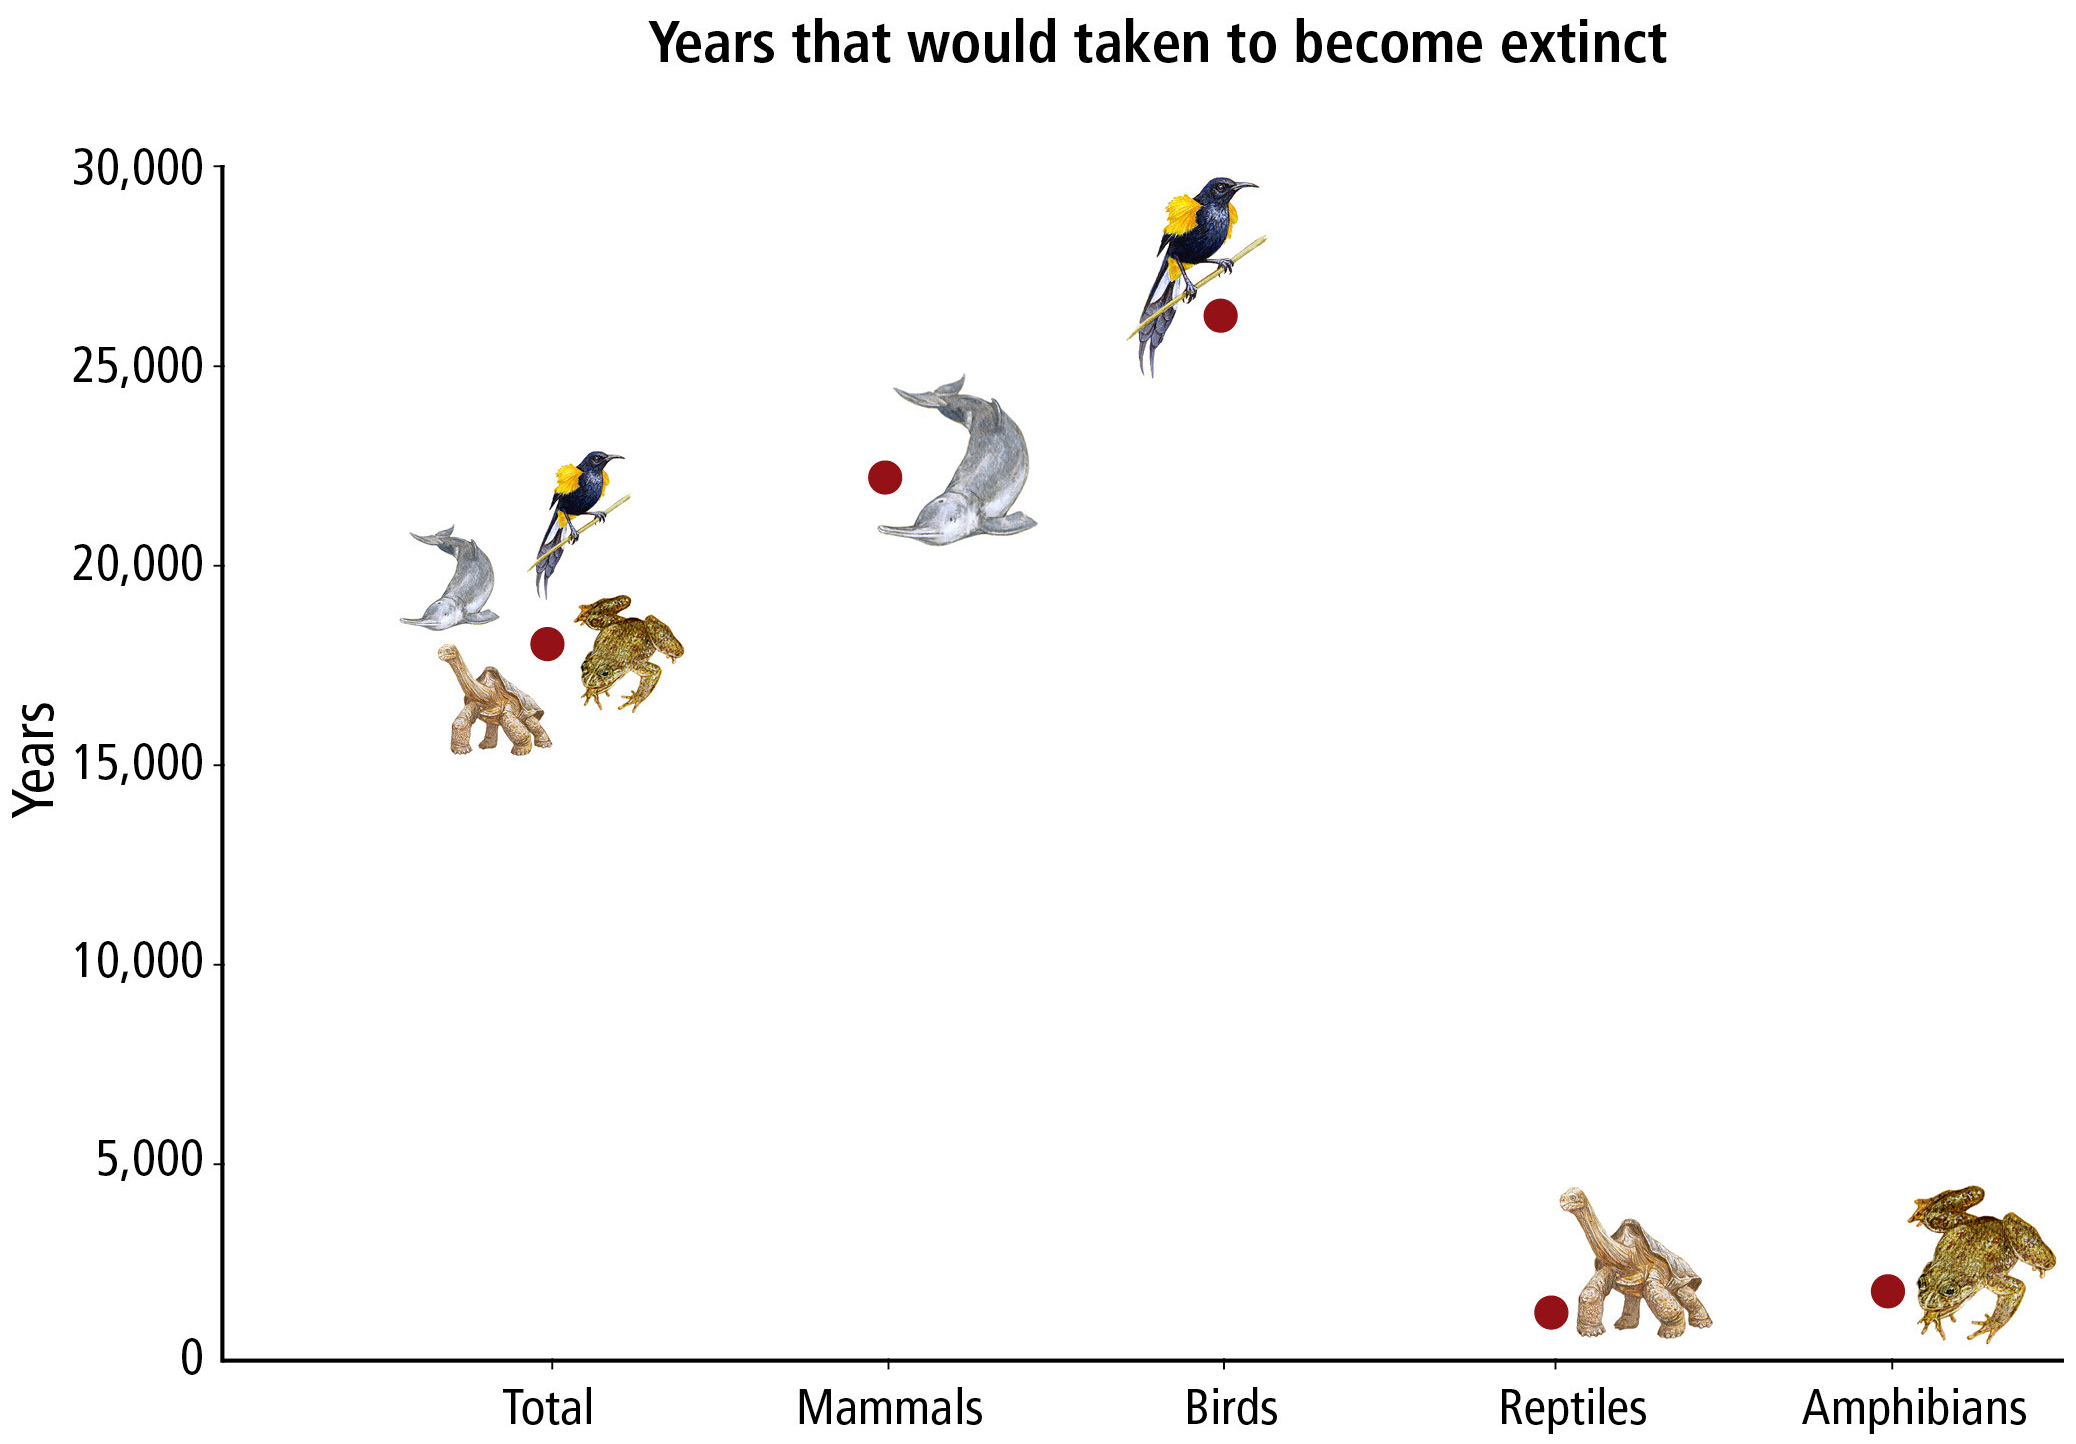 Number of years that would have taken for vertebrate genera to become extinct under the background extinction rate prevailing in the last million years. The number of years for all extinct vertebrate genera is 18,000 y. Reptiles and amphibians have fewer extinct genera, so their values are much smaller that mammals and birds. Graphic: Ceballos and Ehrlich, 2023 / PNAS